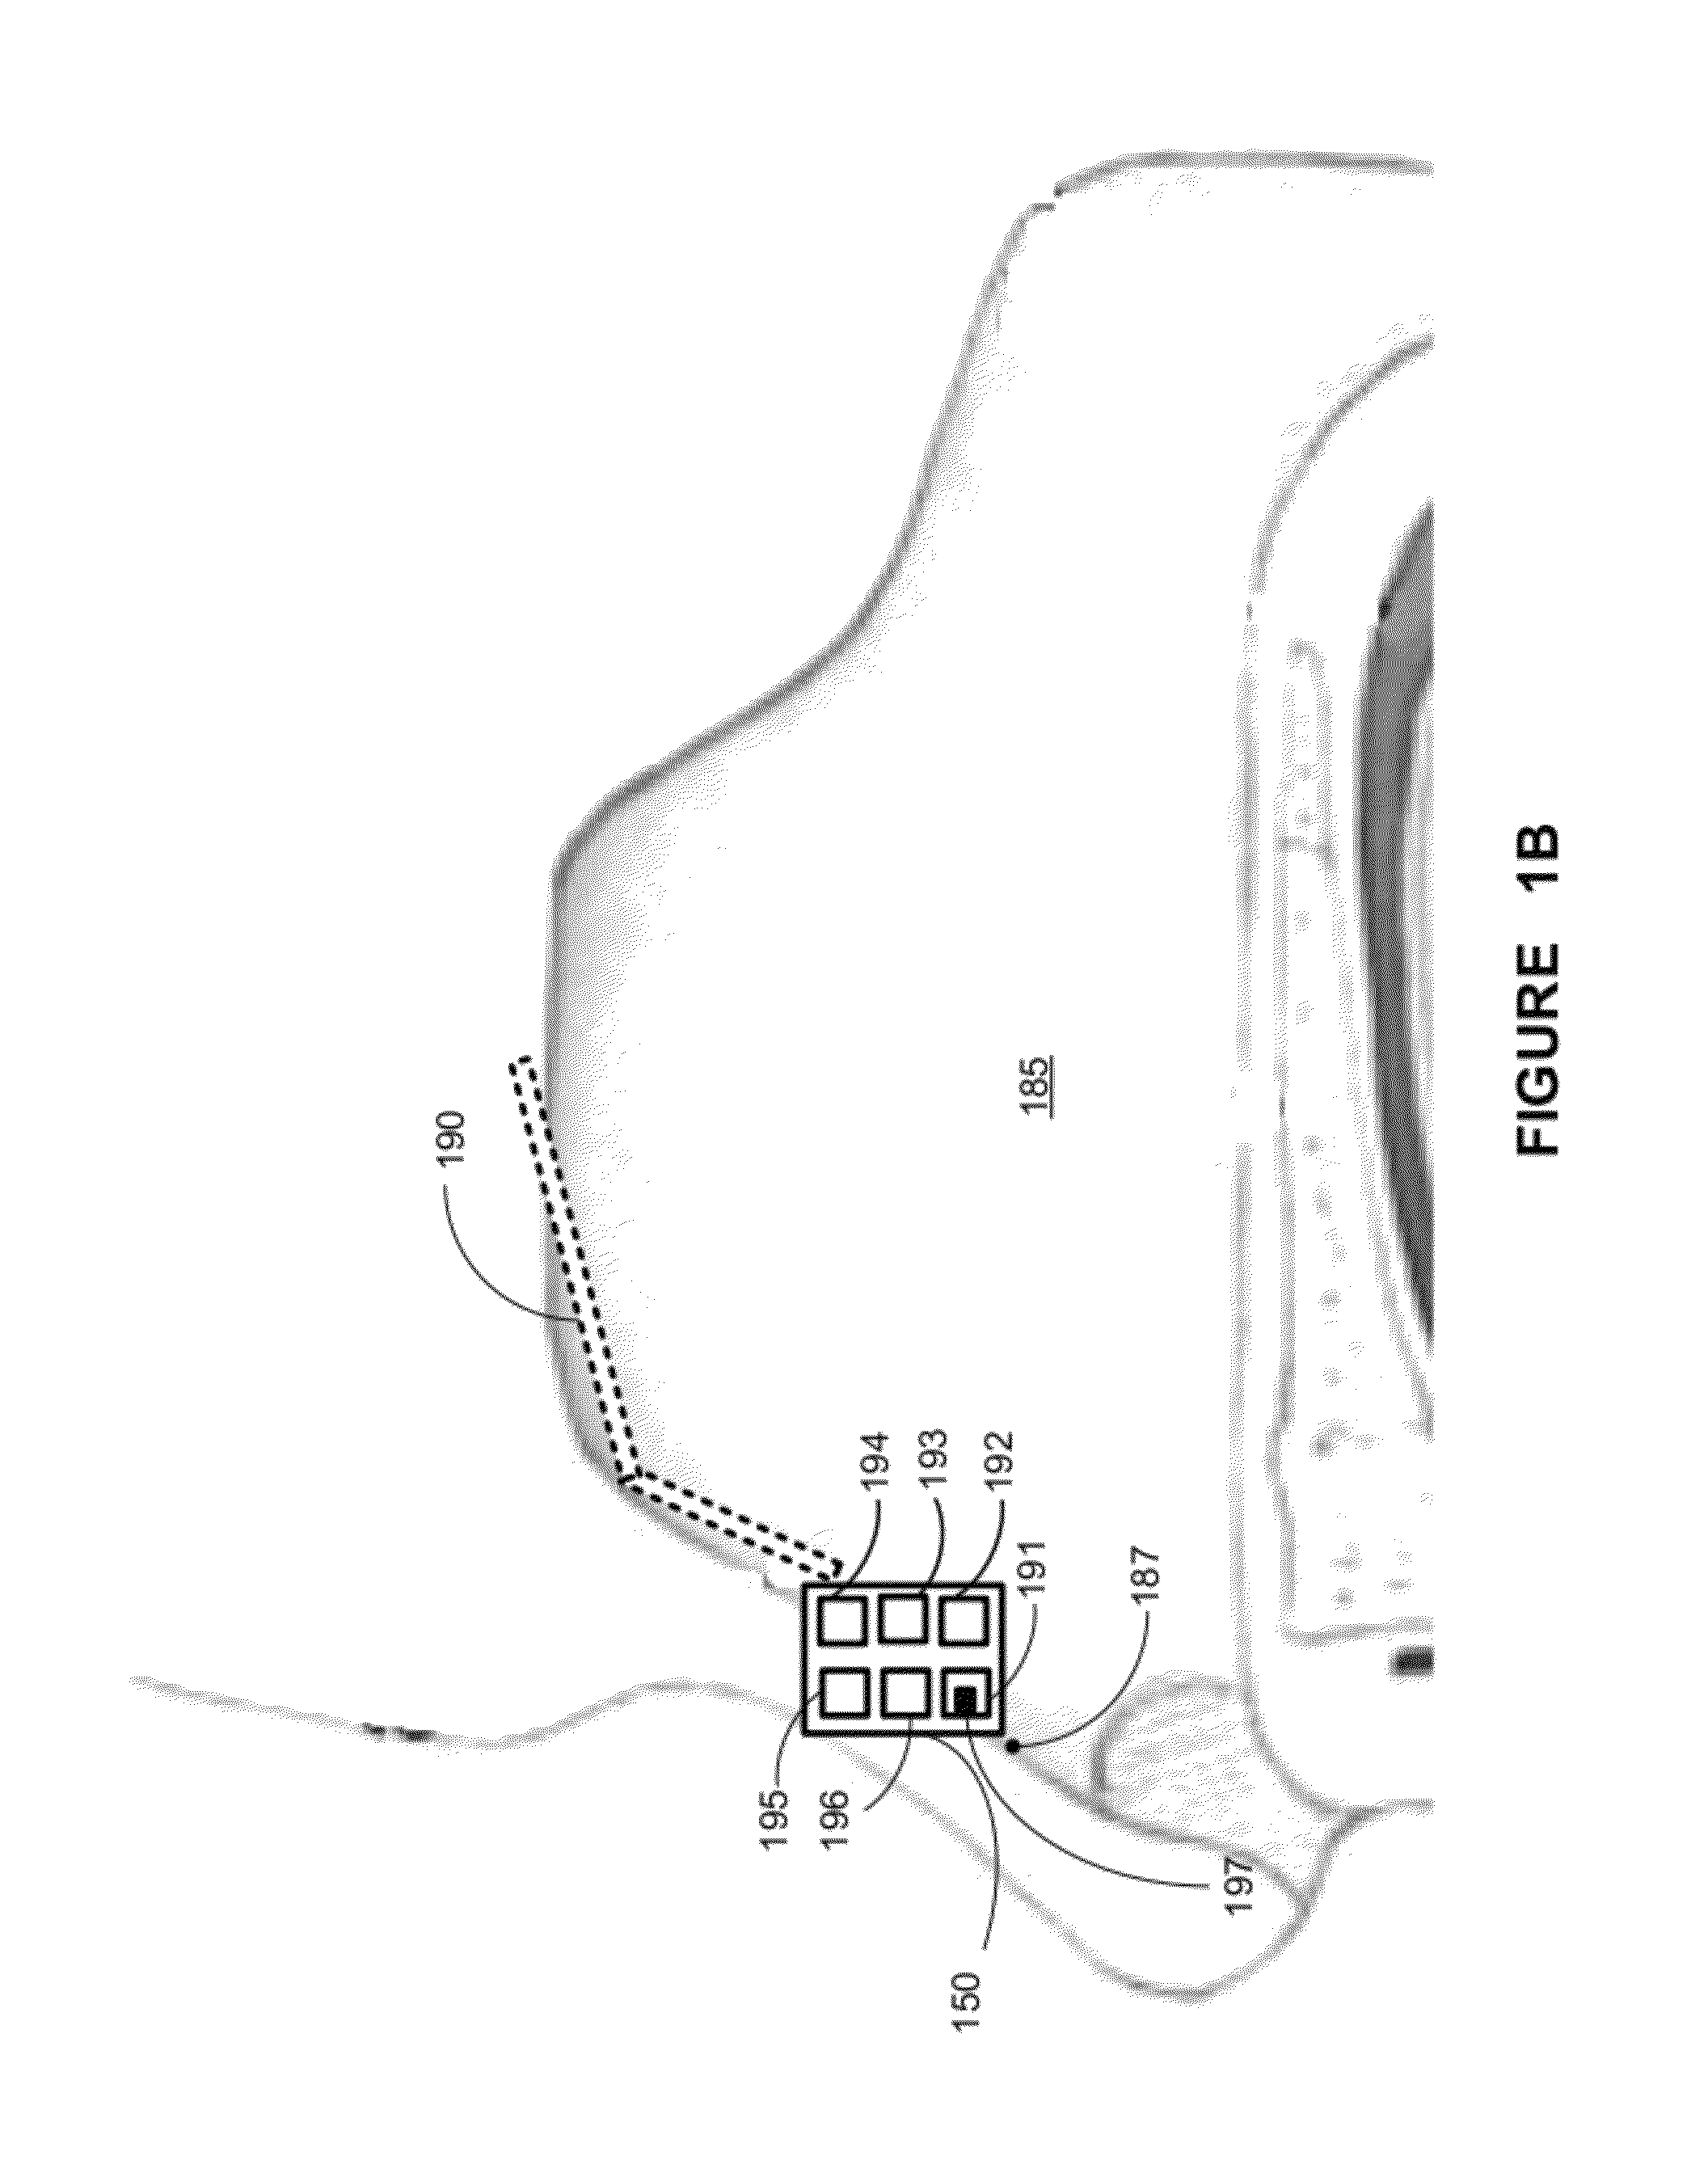 Apparatus and methods for delivery of therapeutic agents to mucous or serous membrane